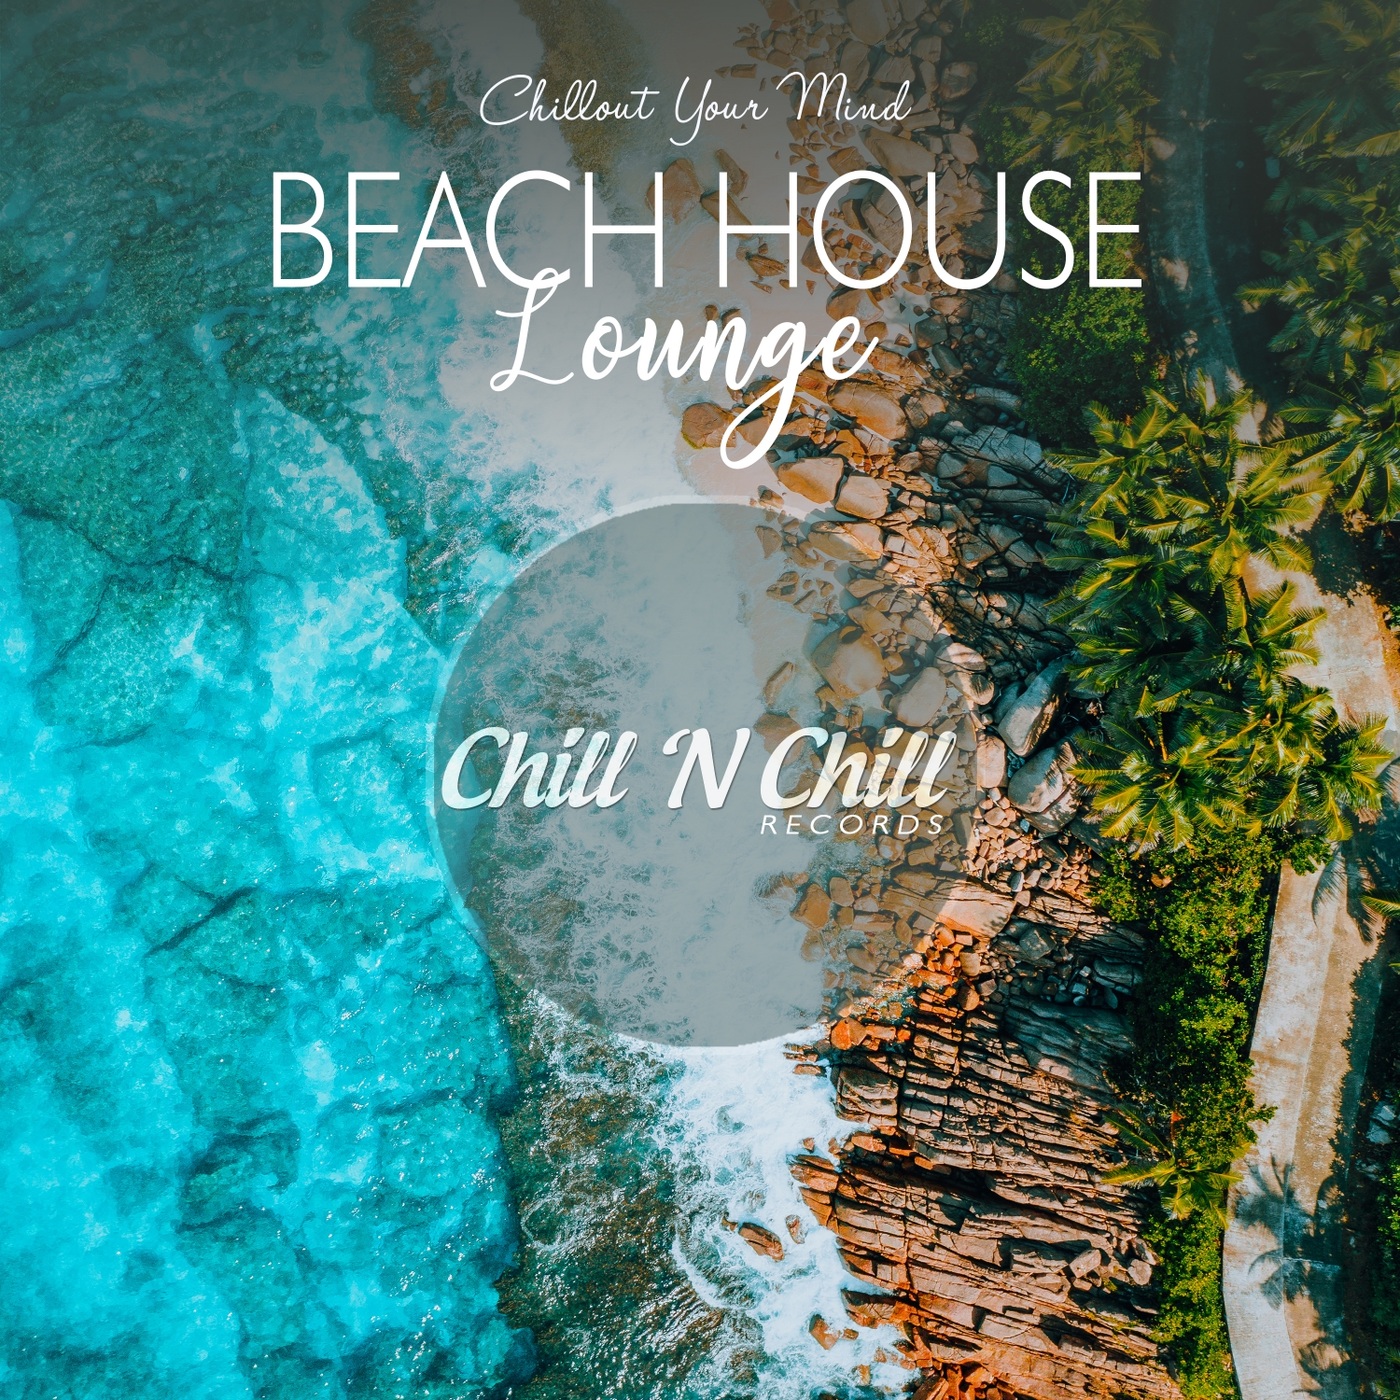 chill n chill records《beach house lounge：chillout your mind》cd